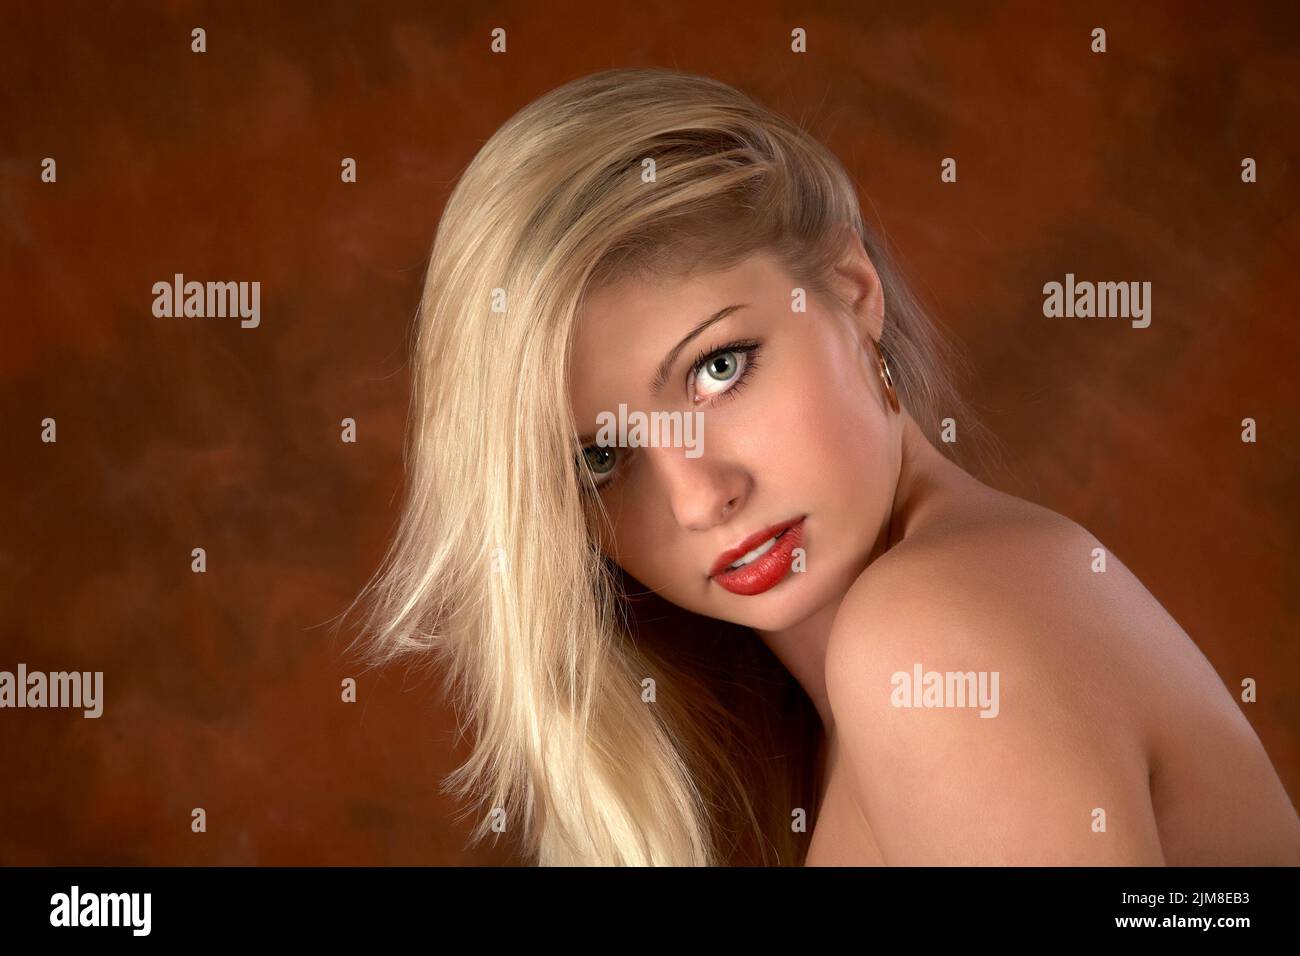 Portrait of the girl with white hair Stock Photo